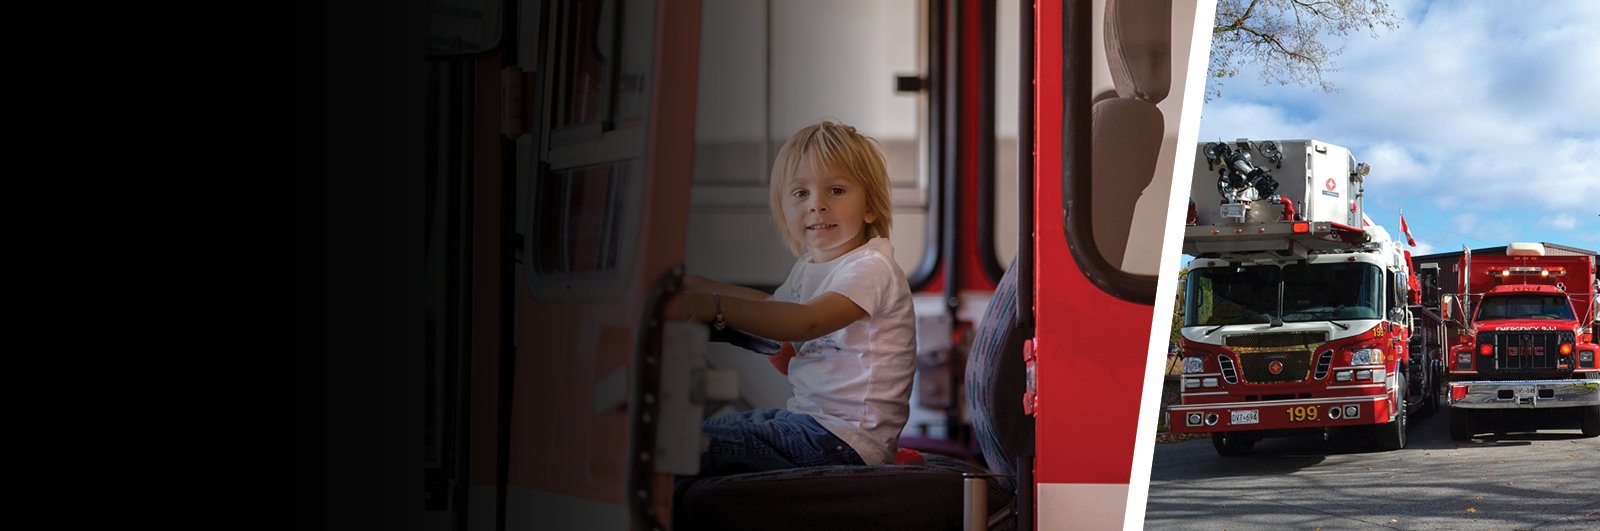 Child on firetruck and a row of firetrucks at station 1